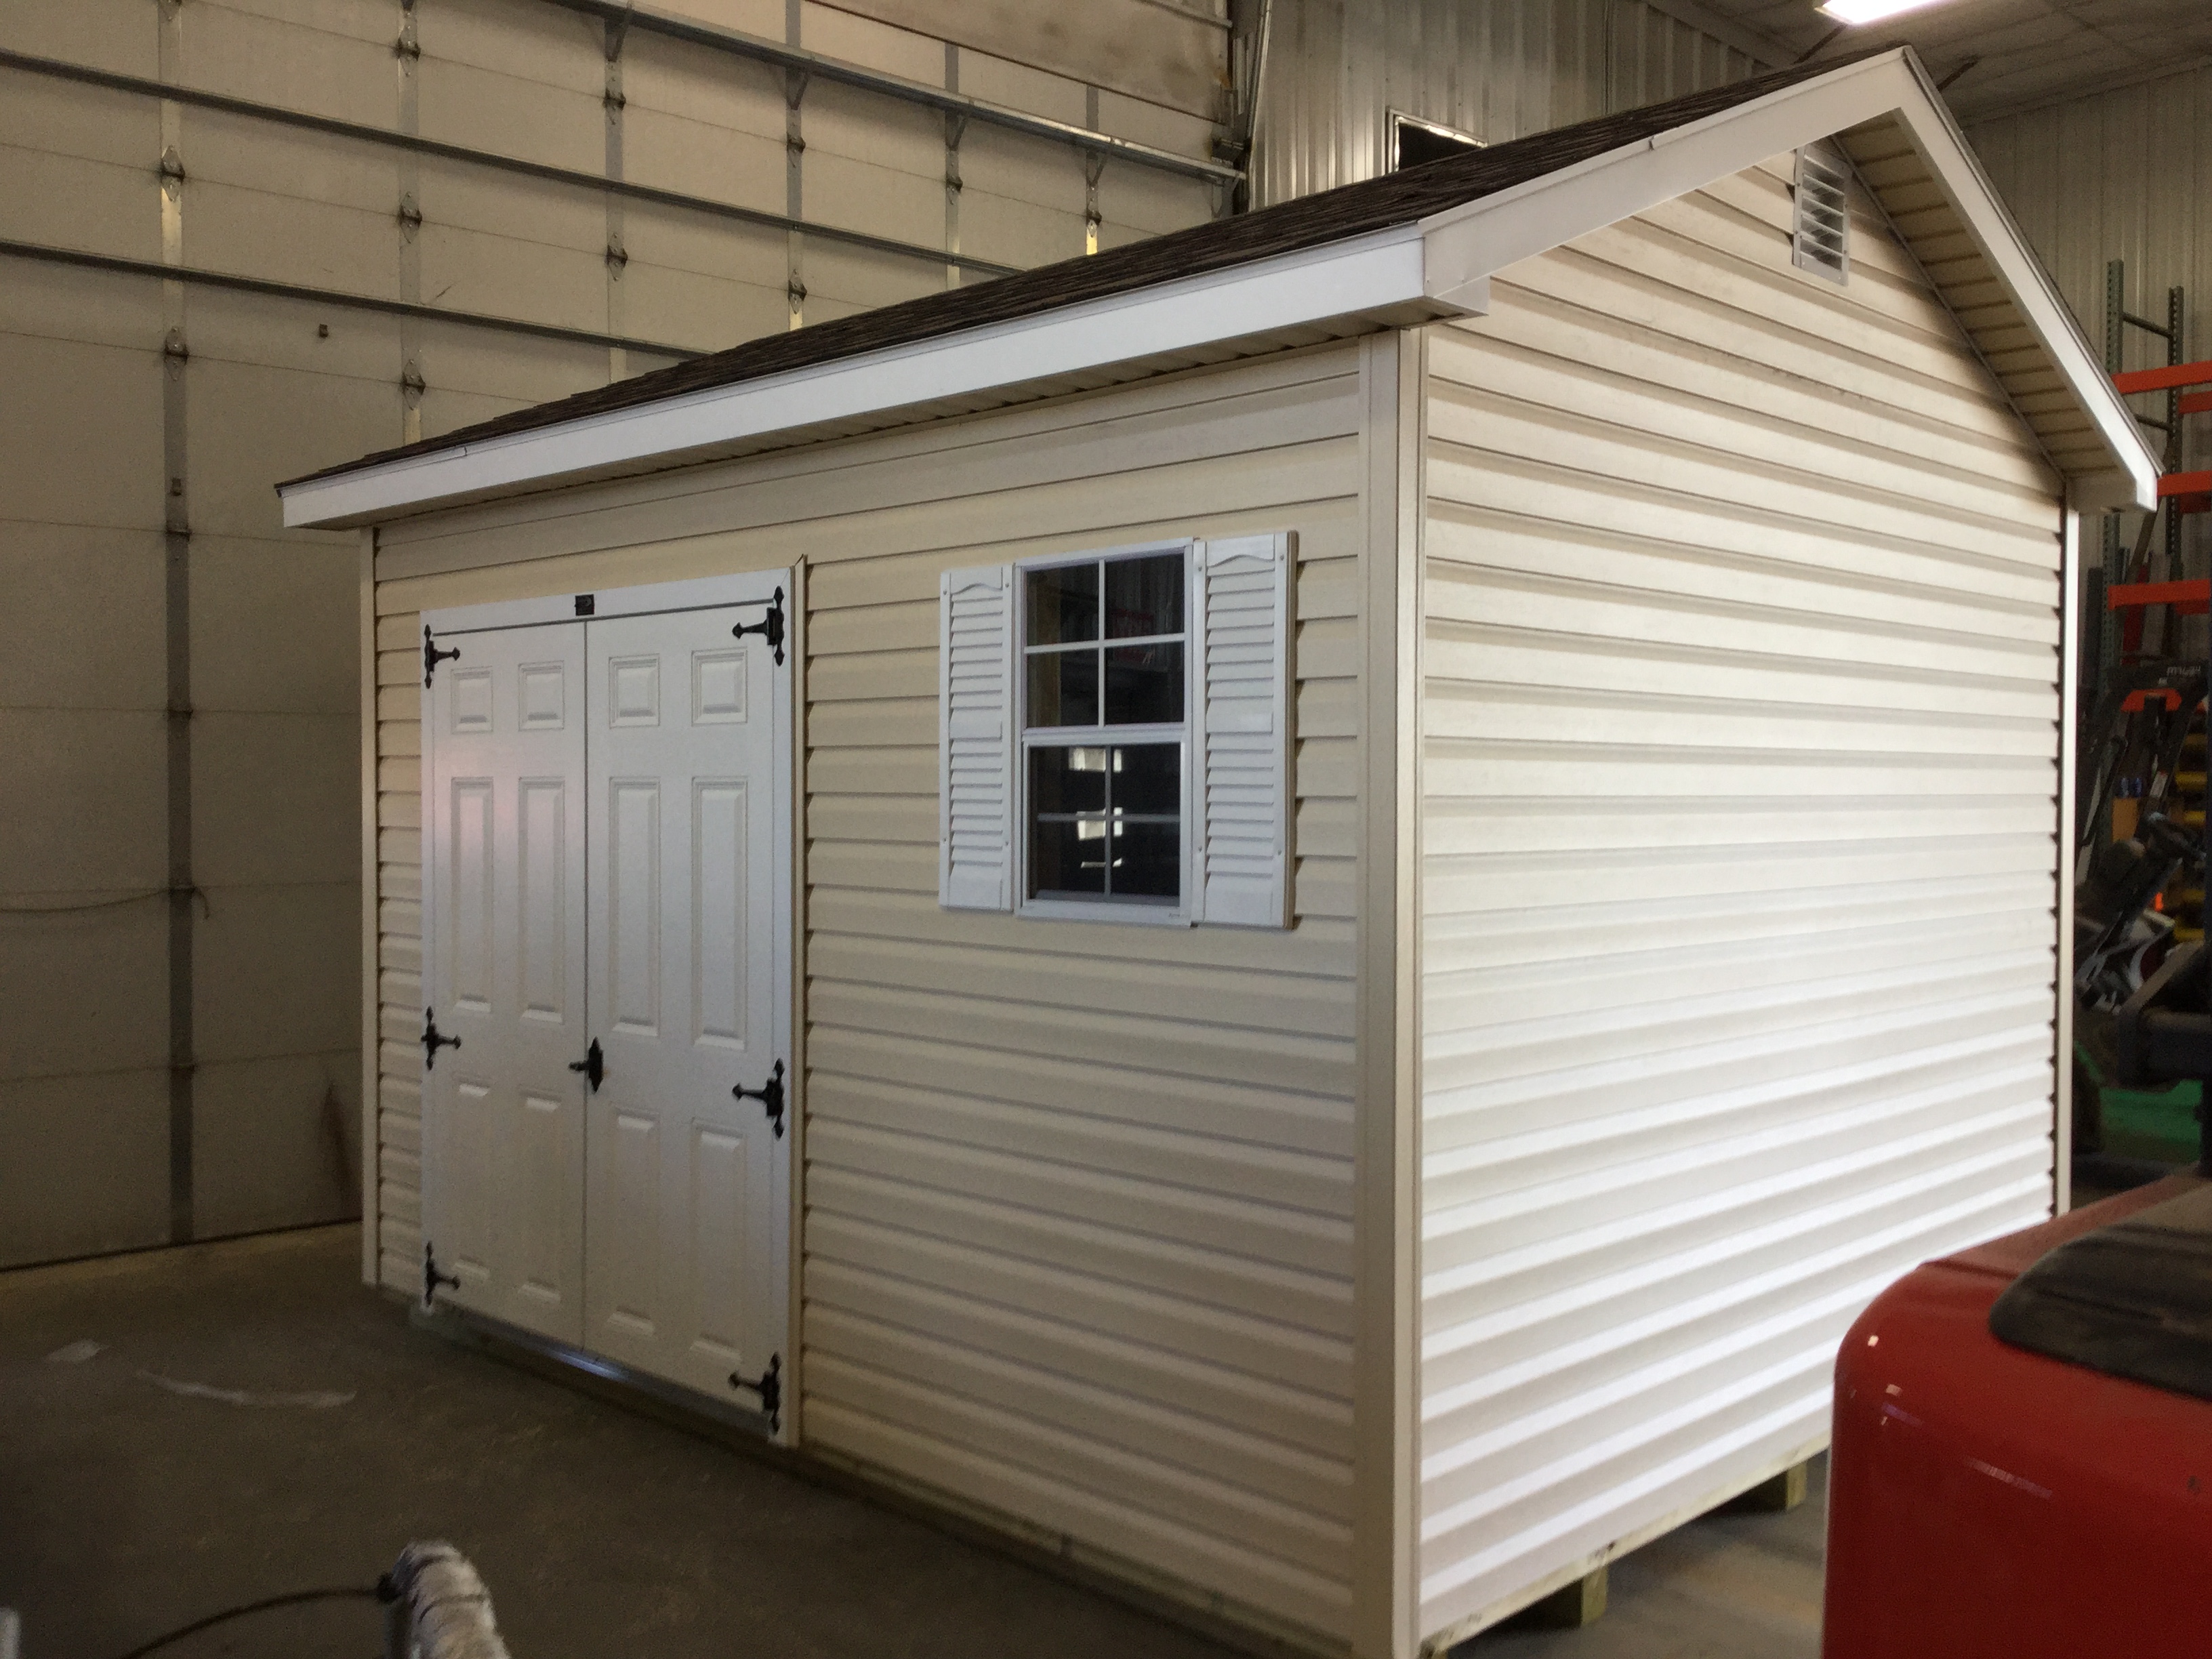 10x12 ranch style vinyl shed for sale #25475 northland